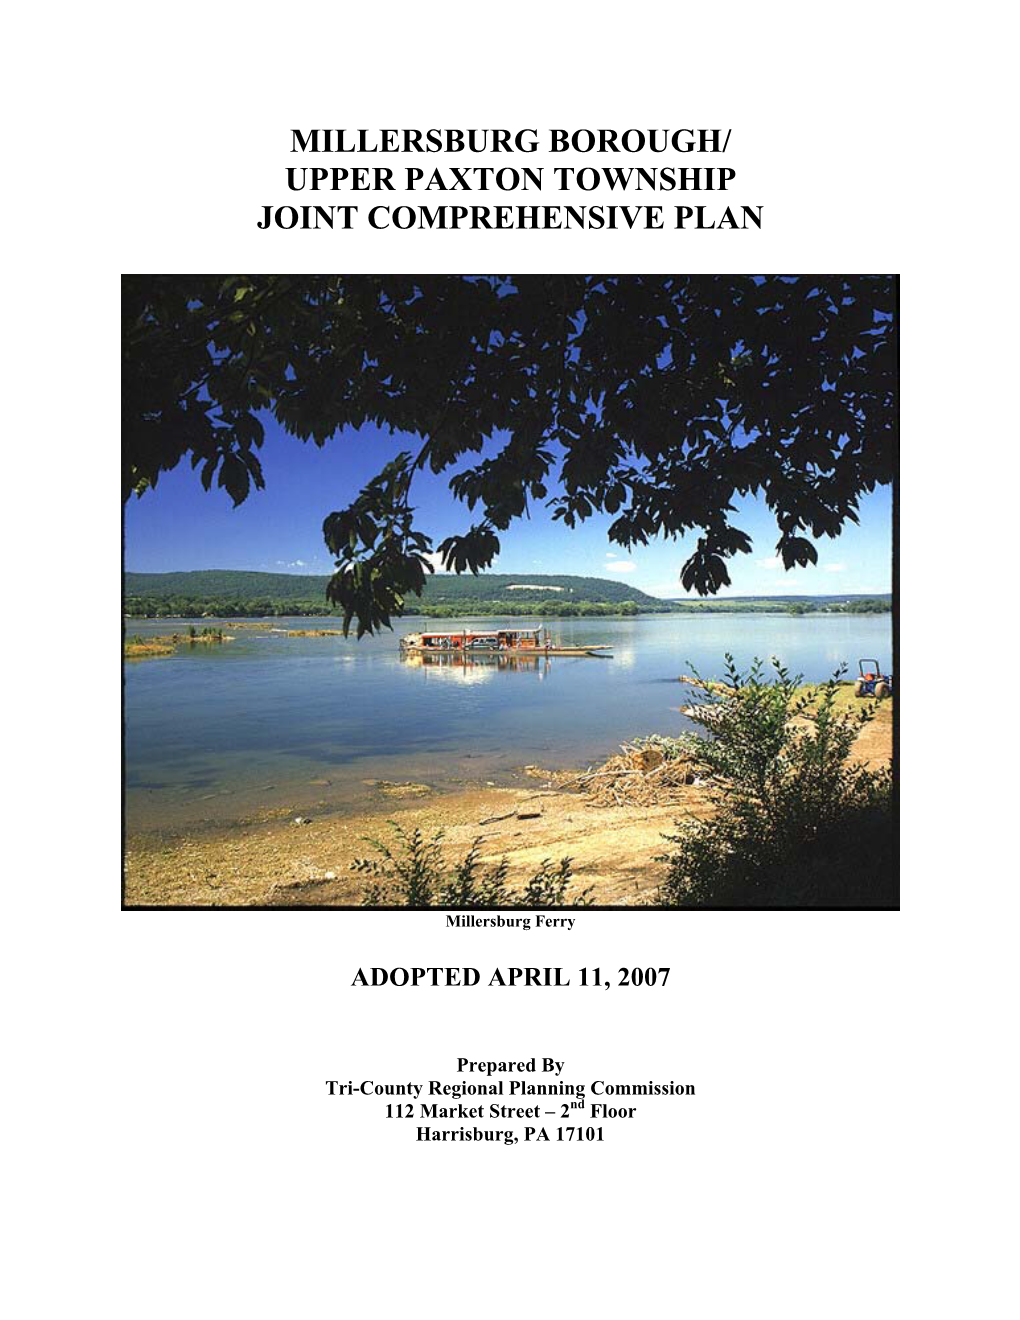 Upper Paxton Township Joint Comprehensive Plan